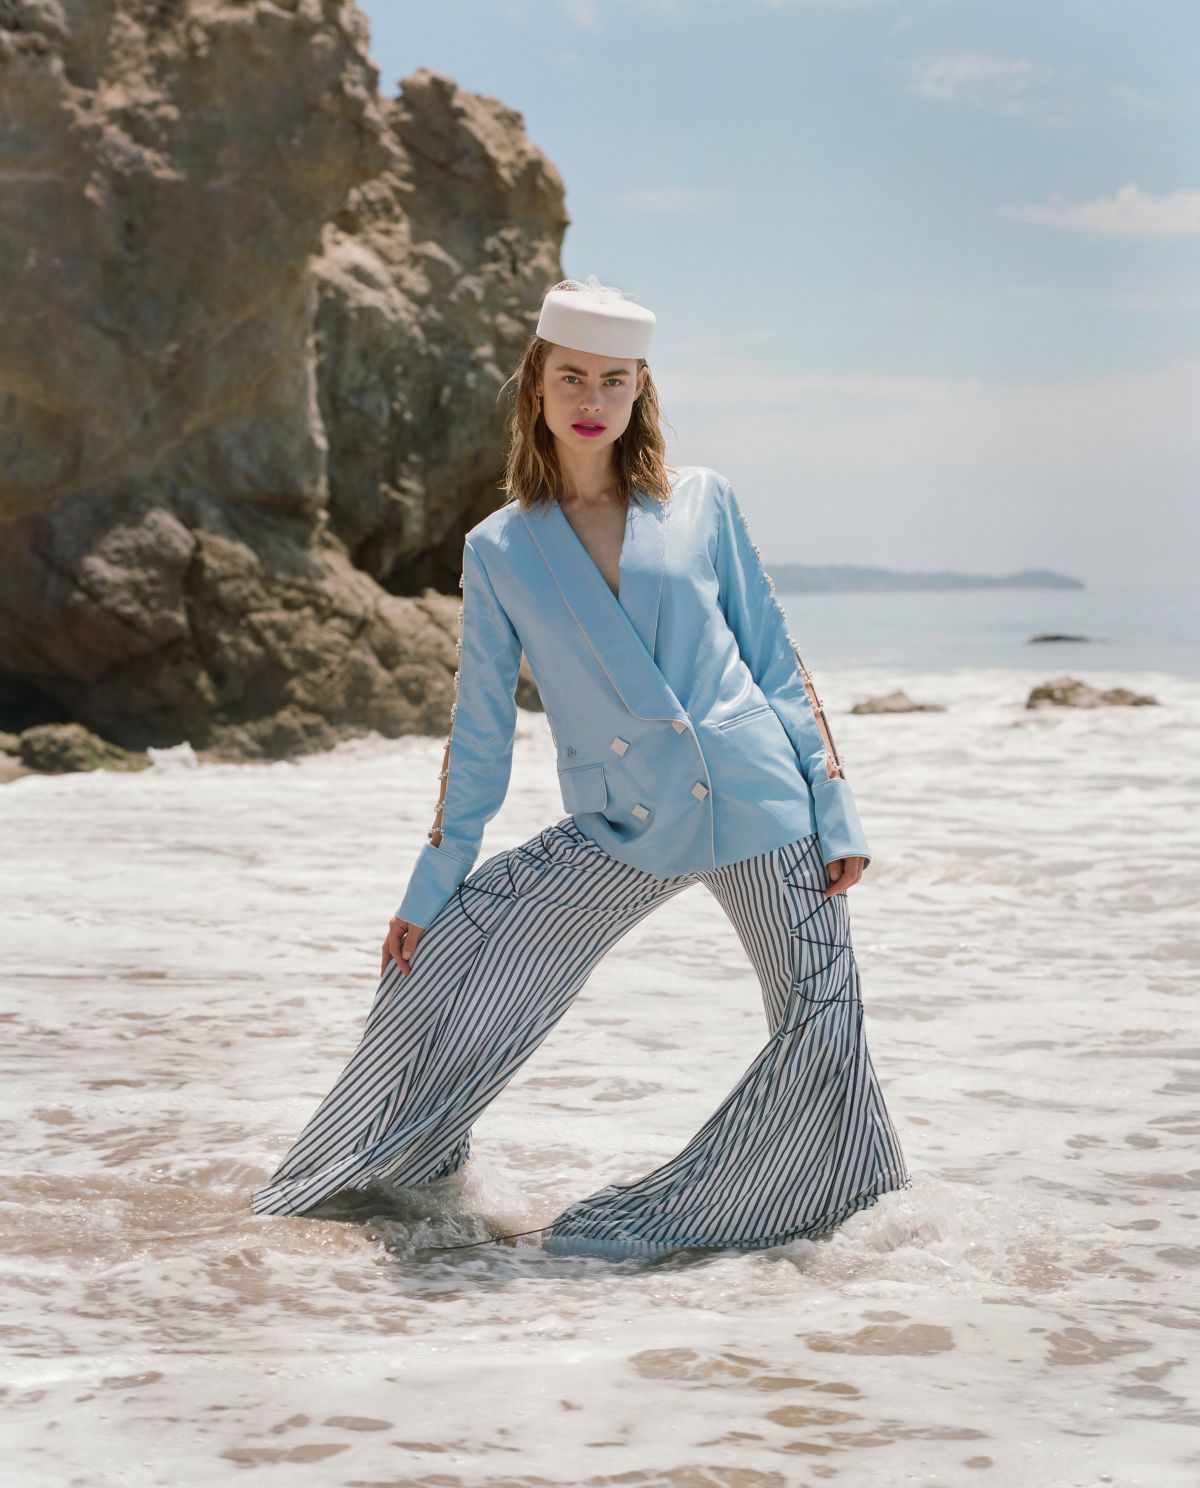 LUCY FRY for Contentmode Magazine, September 2019 – HawtCelebs